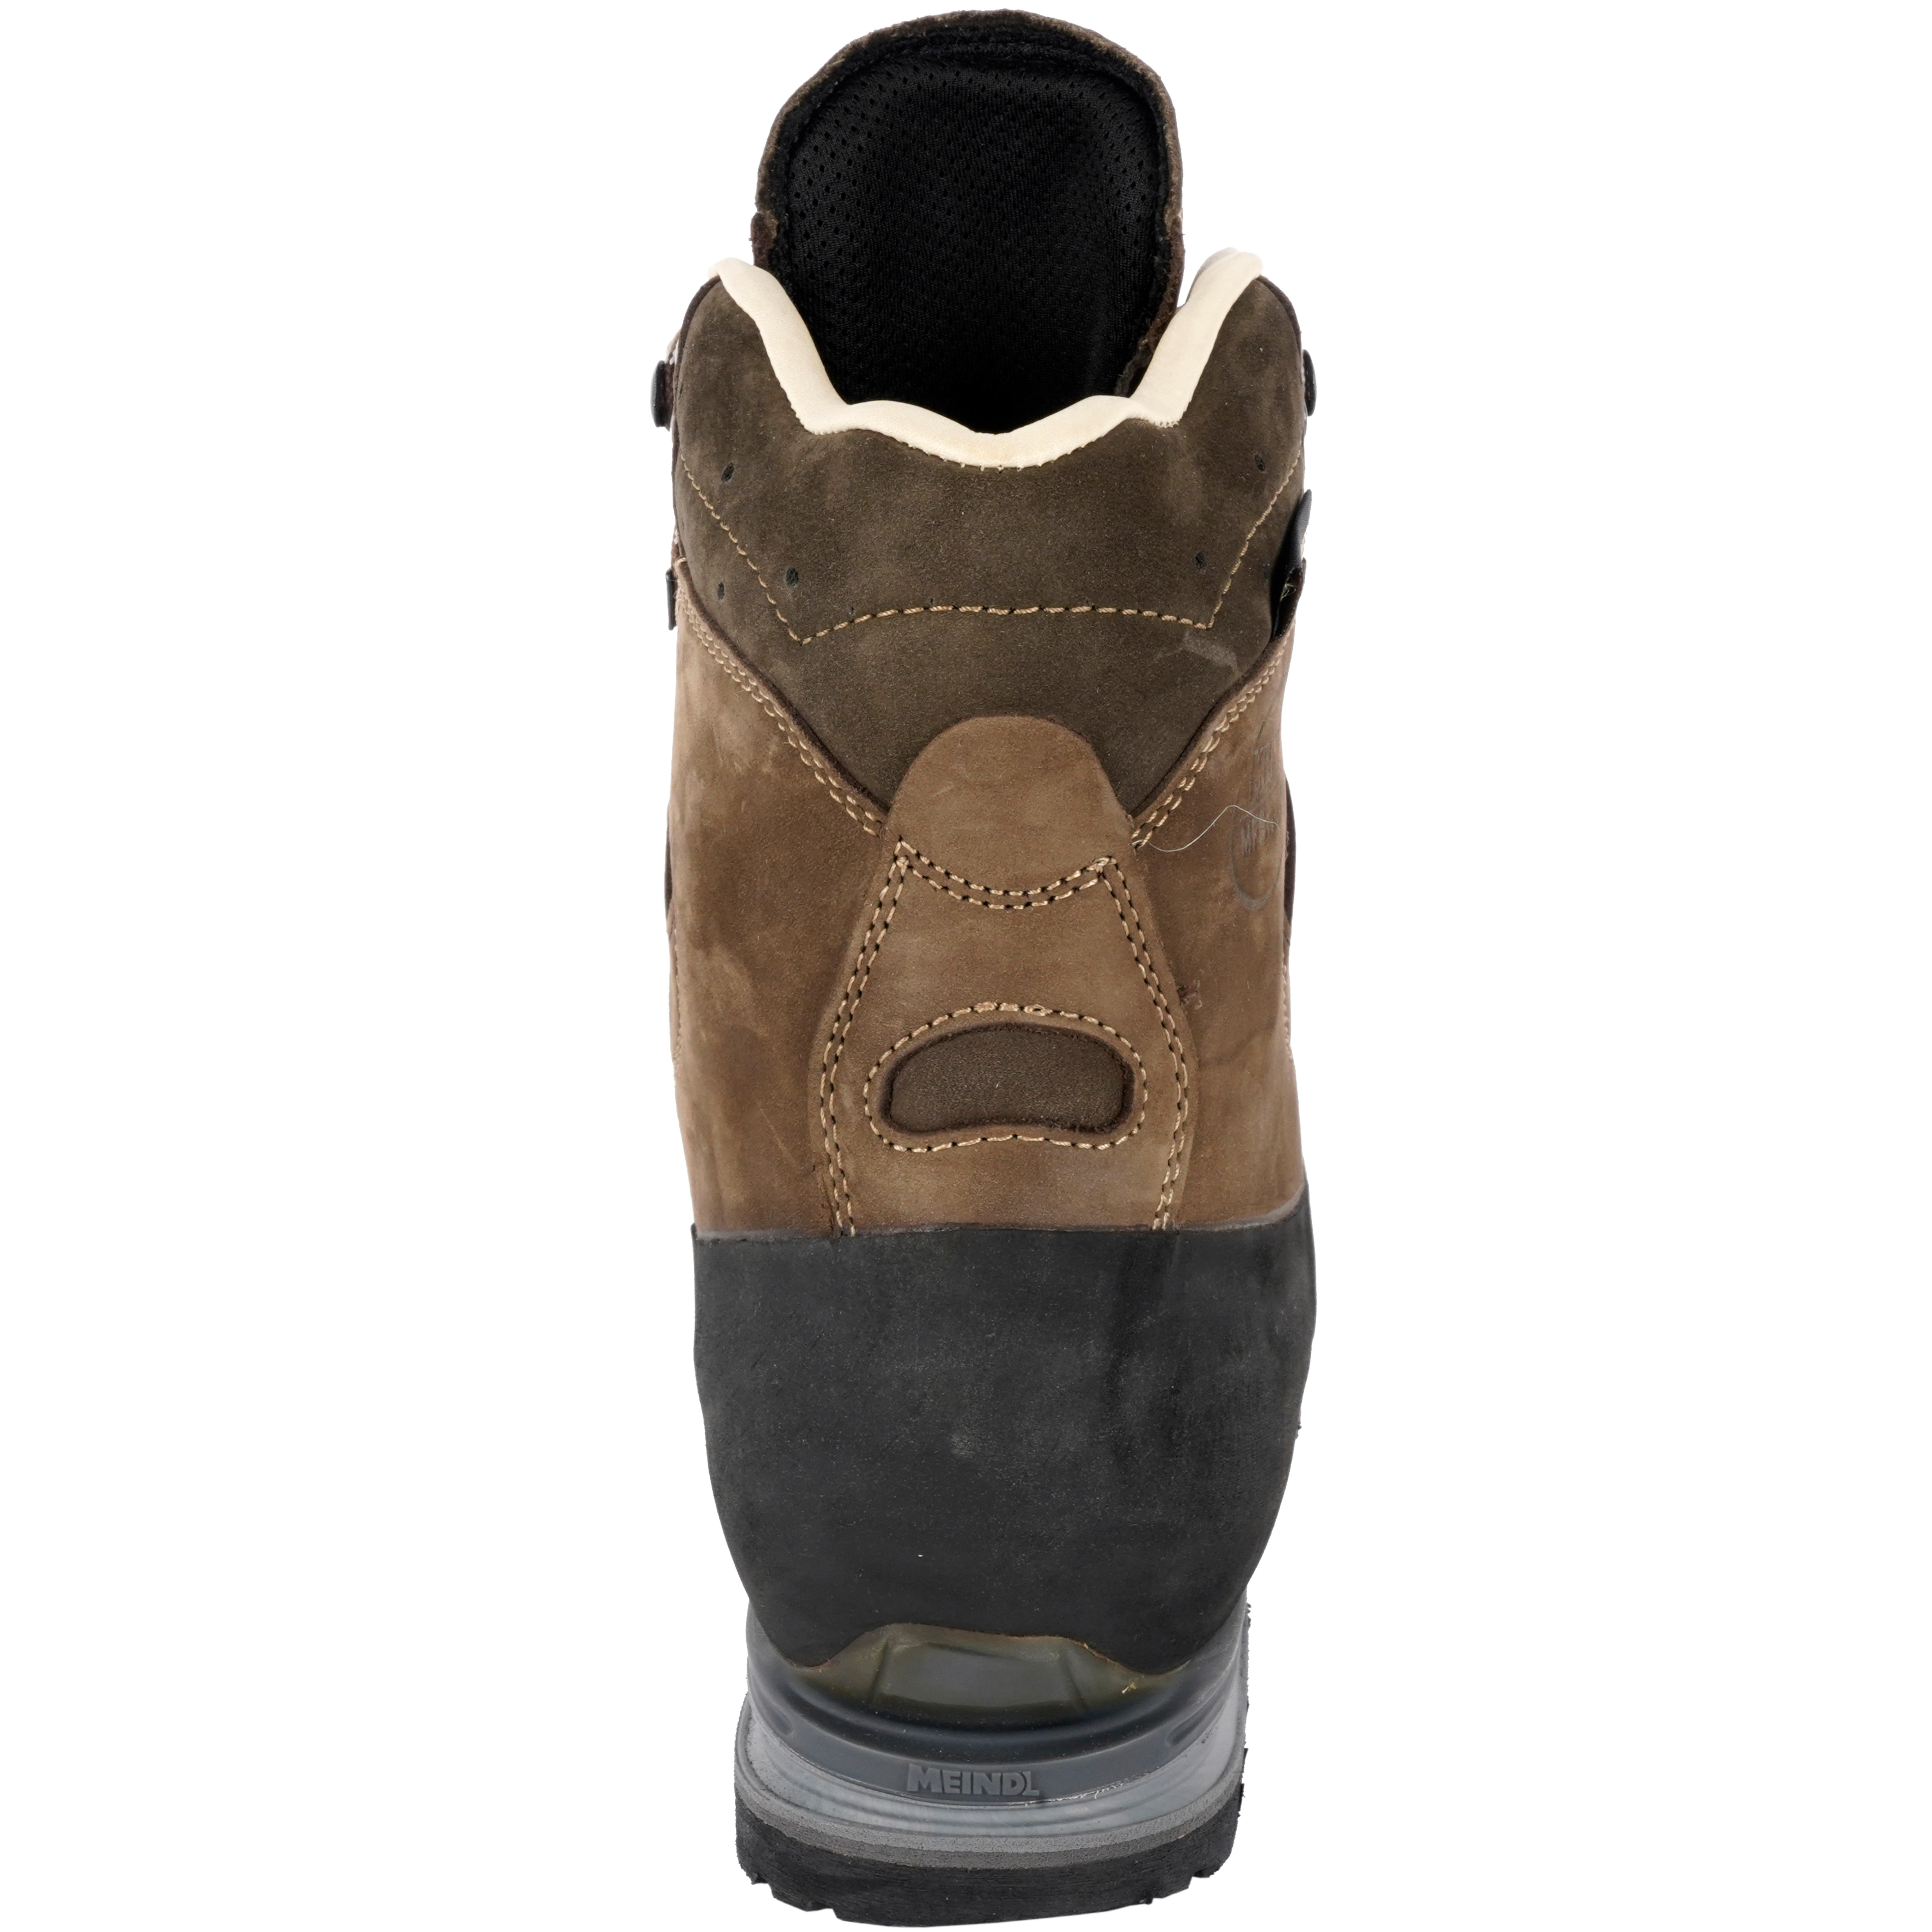 Chaussures chasse IMPERMEABLES RESISTANTES Meindl Himalaya Gore-Tex MFS Decathlon